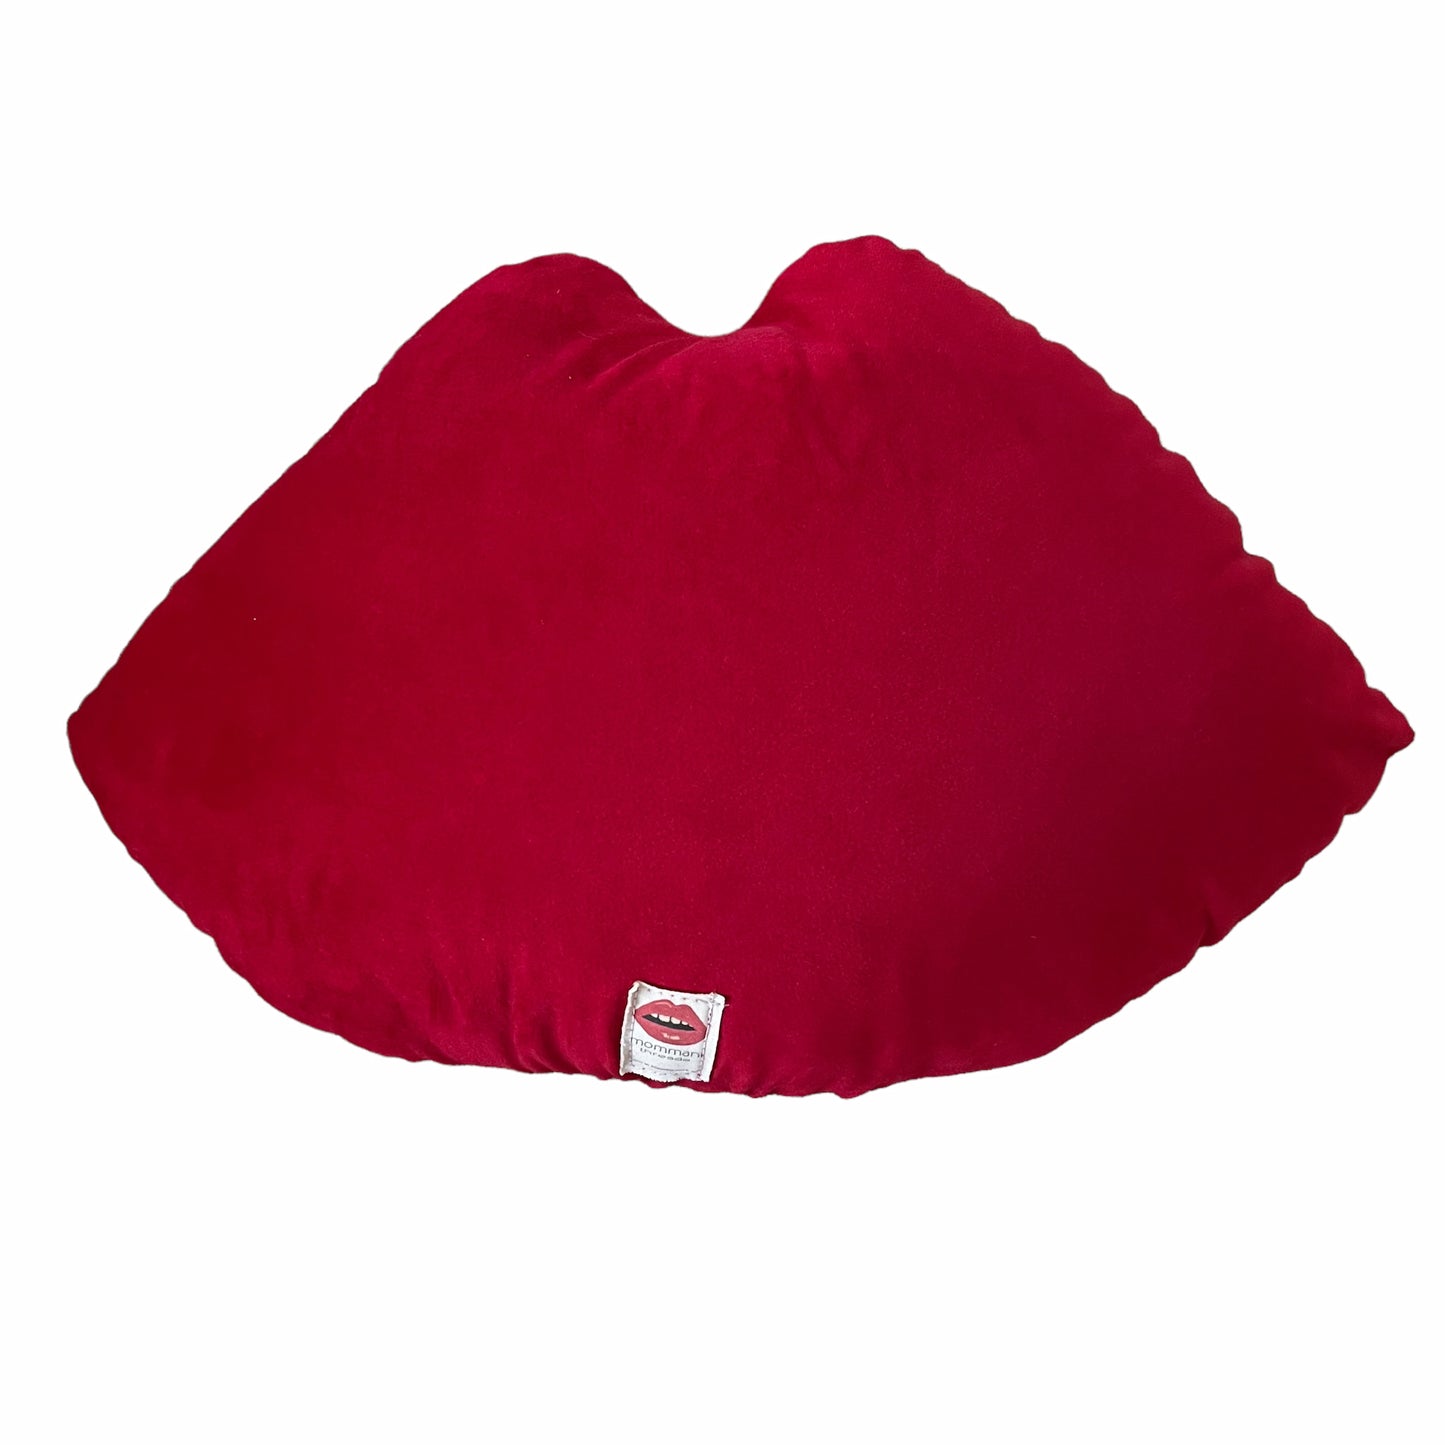 Sculpted red lips pillow features red lips with open mouth & gapped teeth